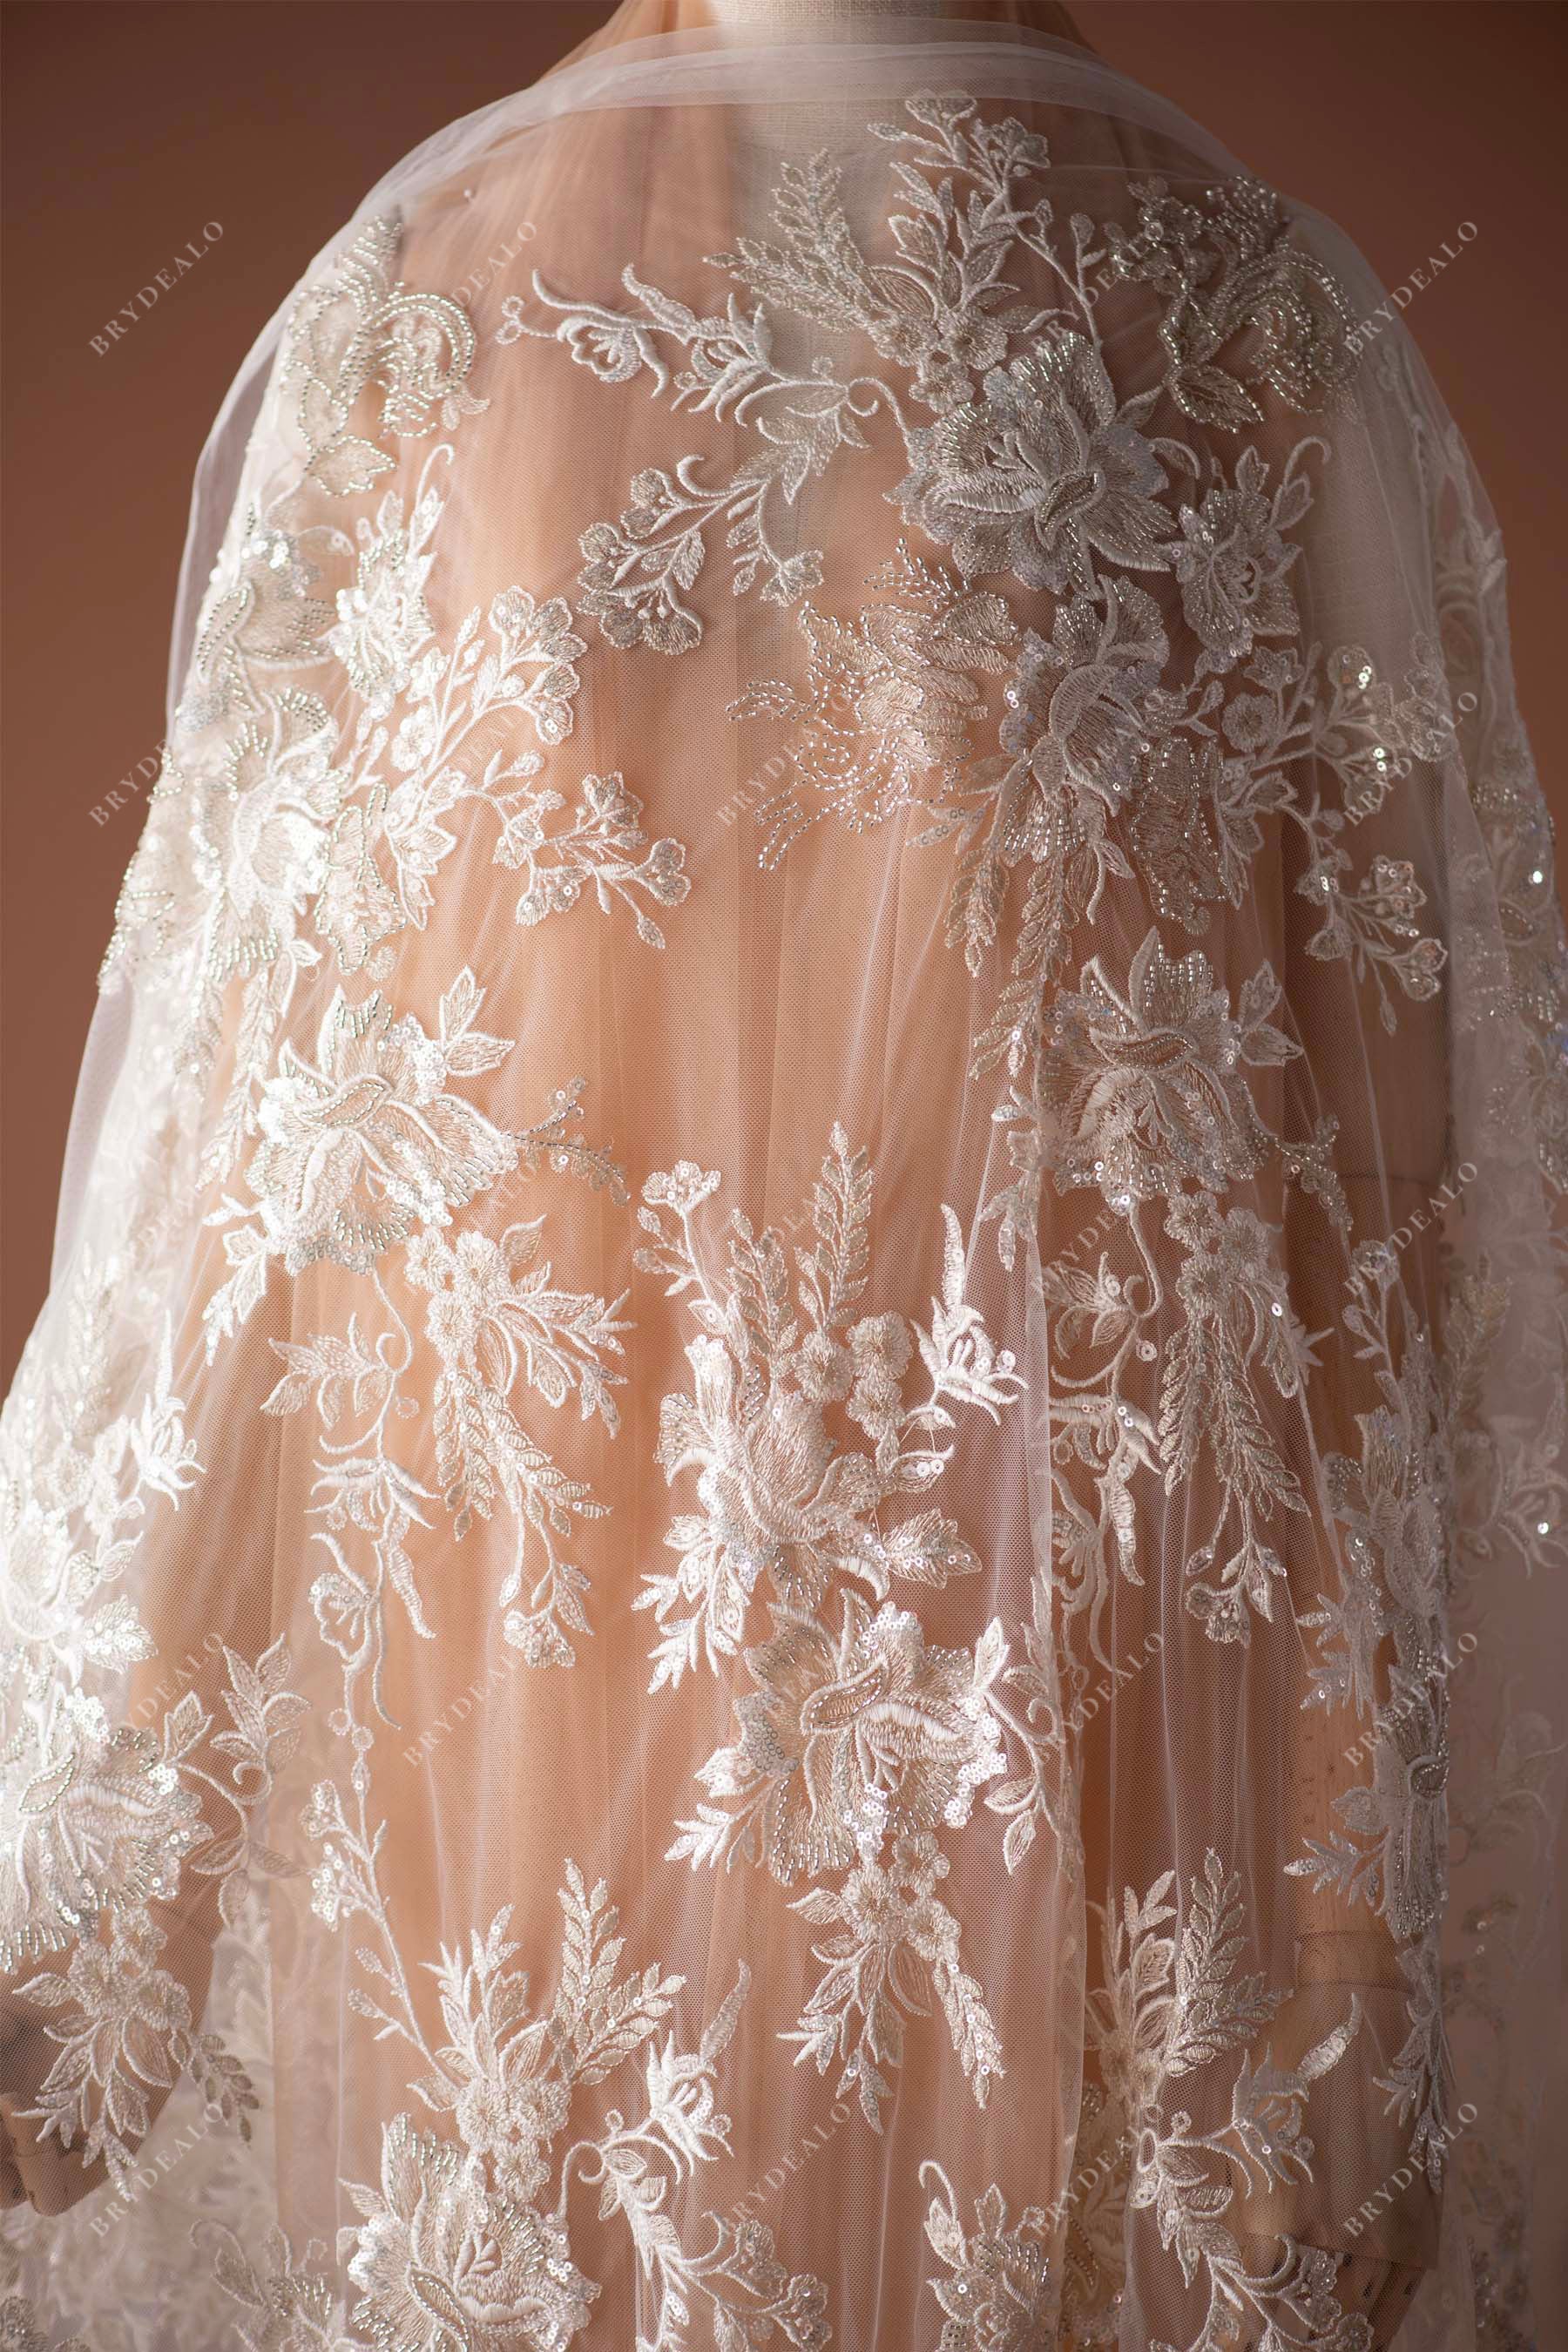 L17-180 // Heavy Embroidered Bridal Lace Fabric, Bridal Dress